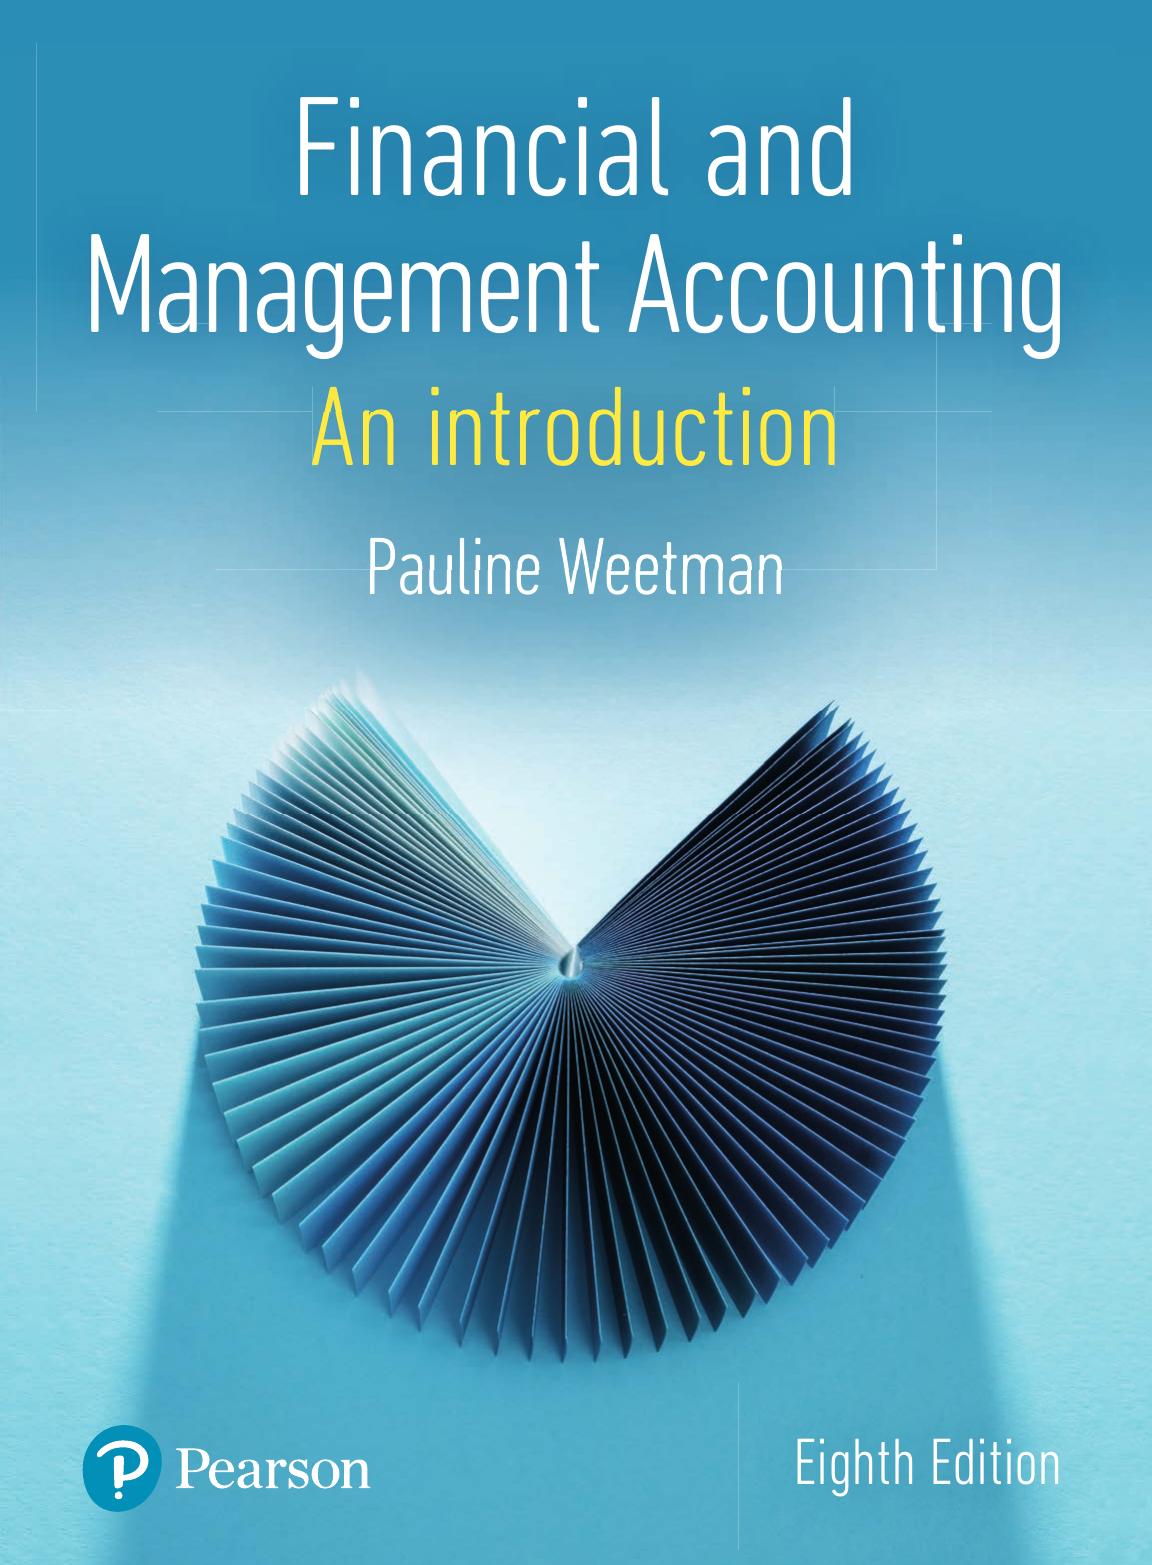 Financial and Management Accounting: An introduction